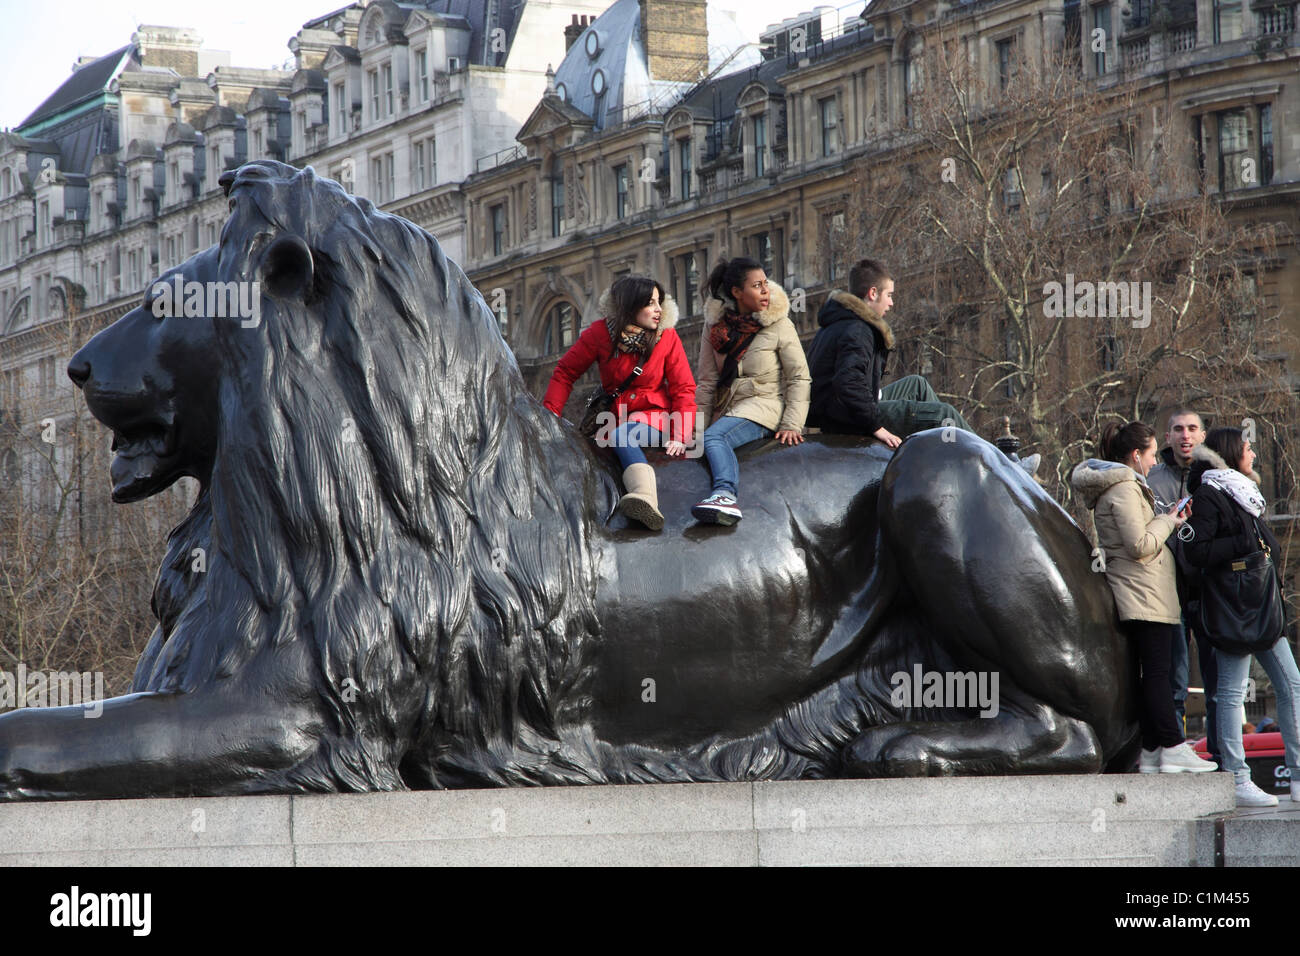 Young people on lion statue in London'sTrafalgar Square Stock Photo